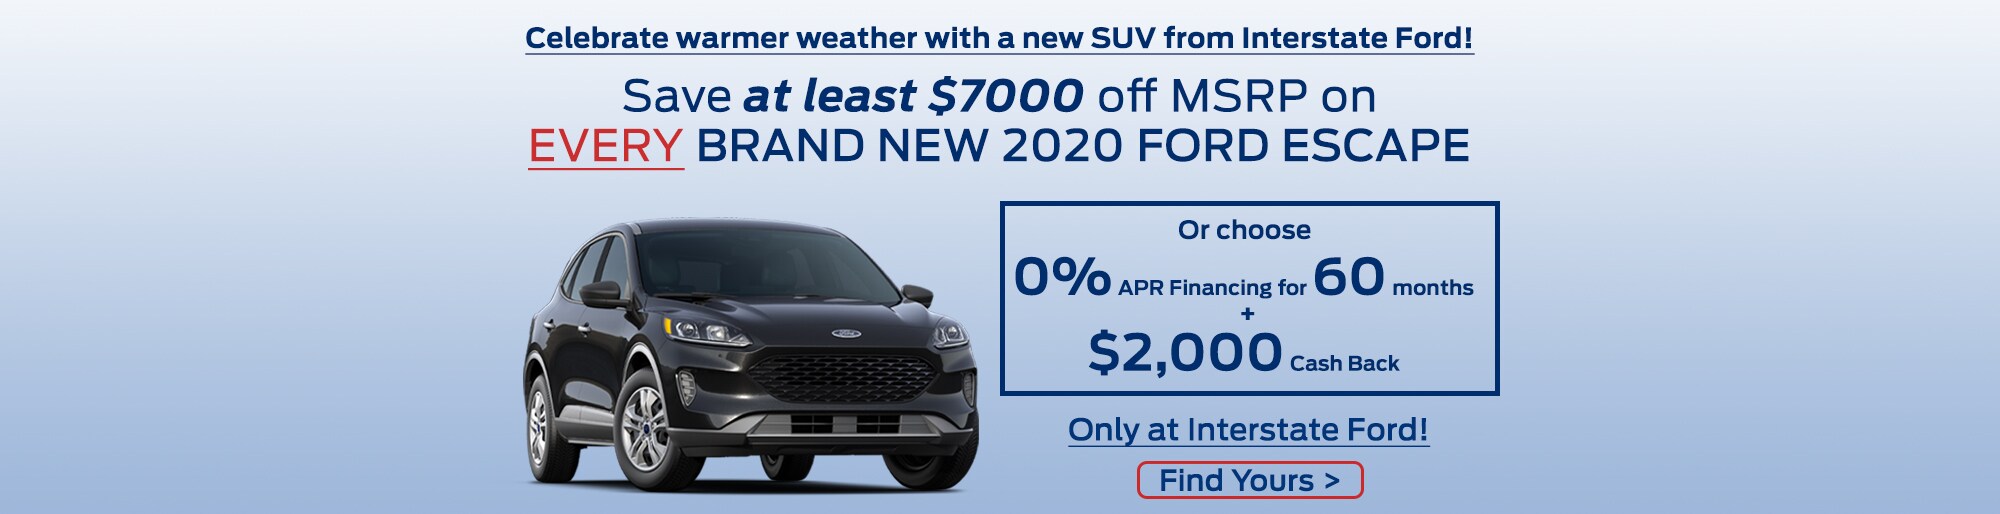 Interstate Ford | Ford Dealer in Miamisburg, Ohio